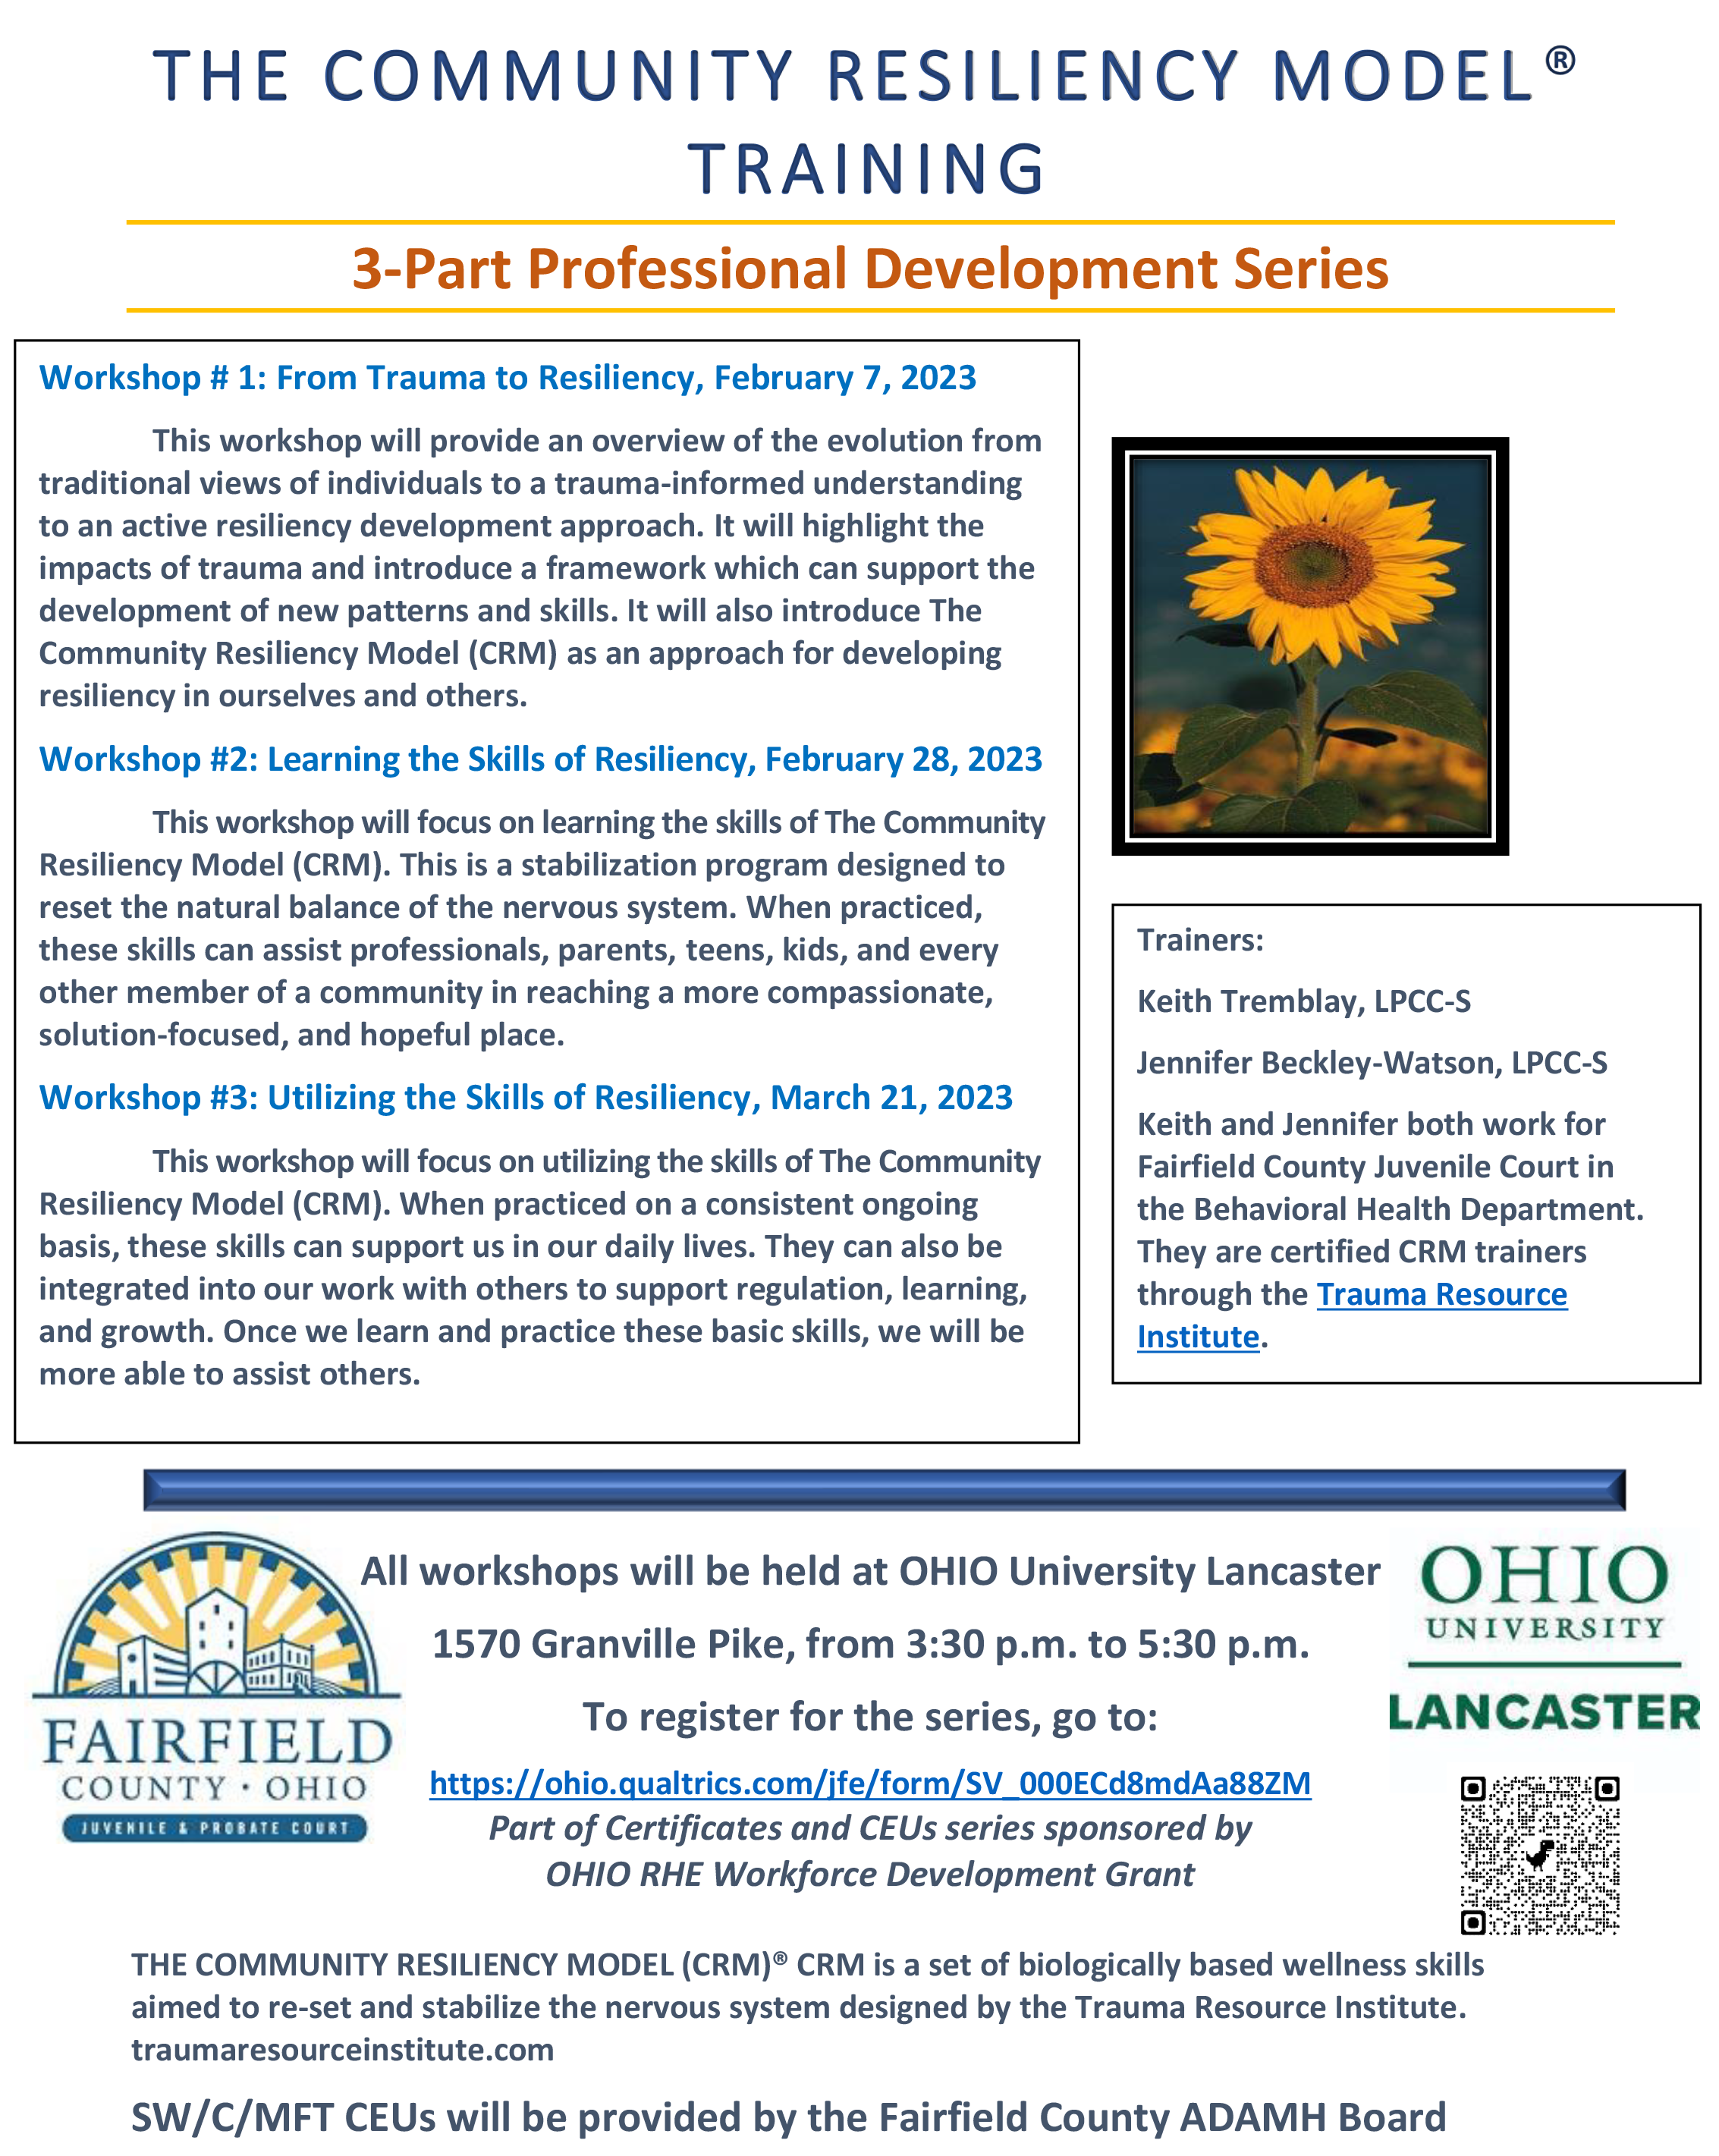  THE COMMUNITY RESILIENCY MODEL TRAINING ad